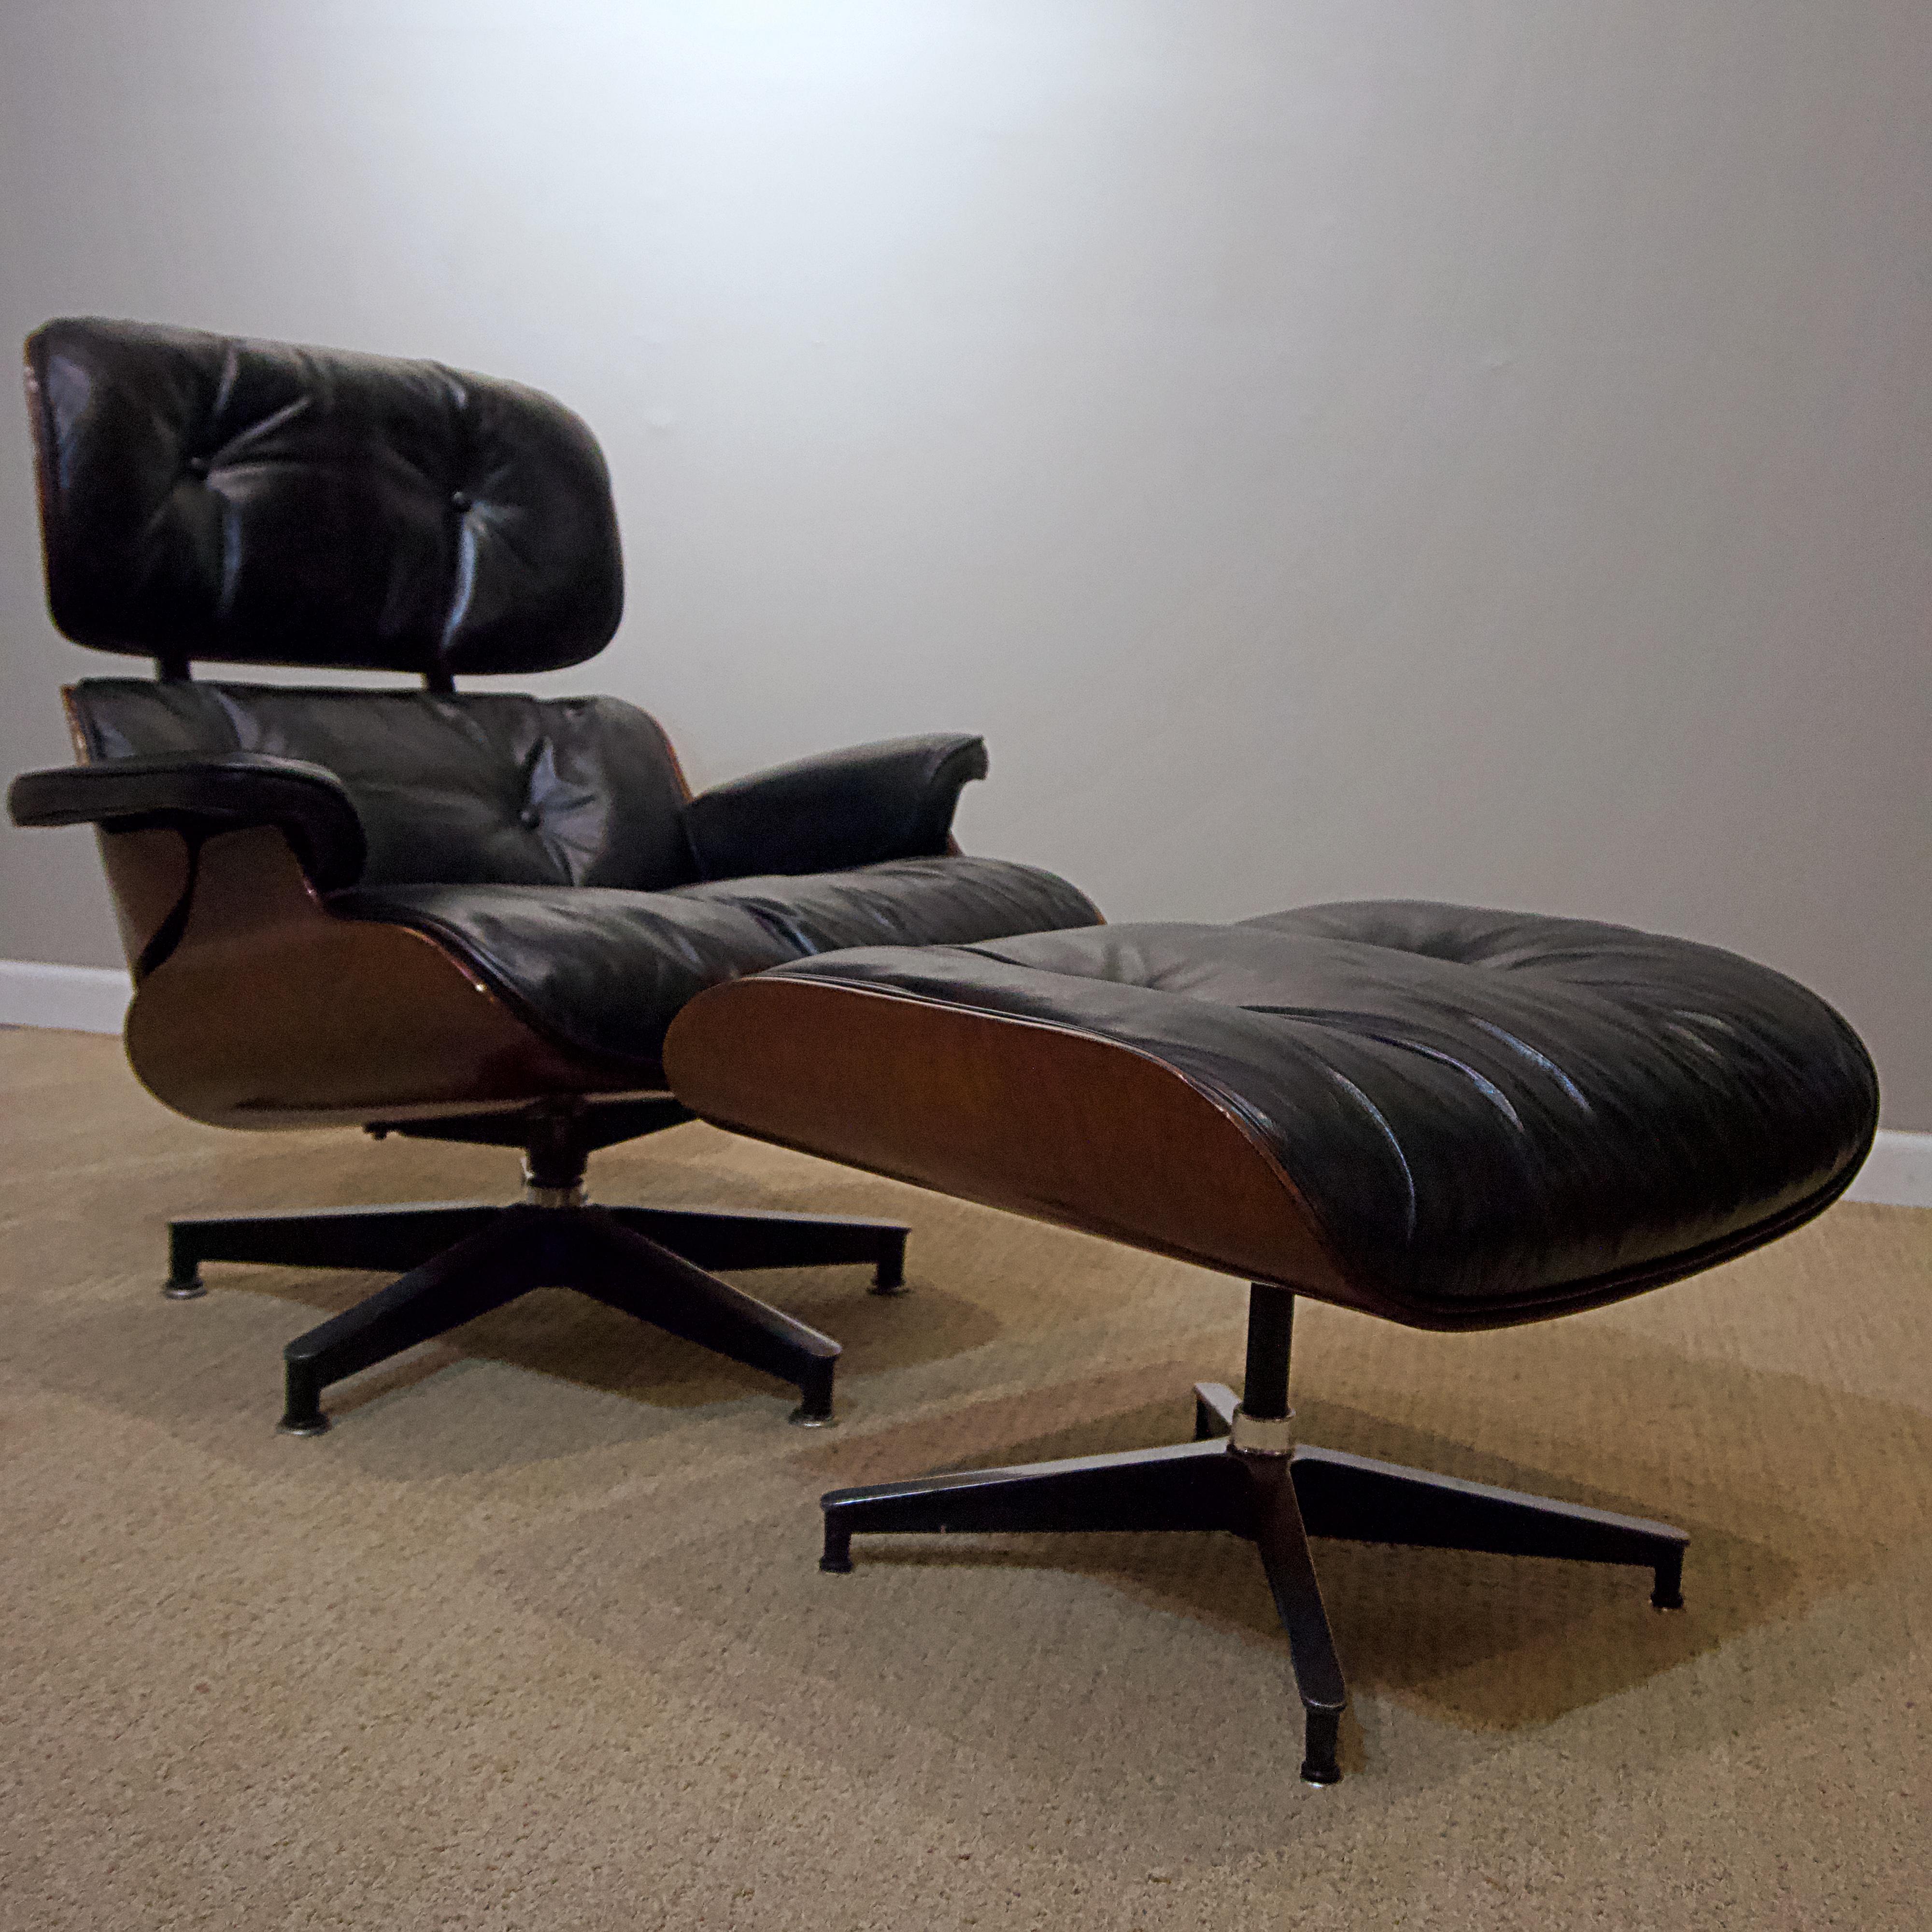 Ames lounge chair with ottoman. Ottoman dimensions: Width 25 3/4”, depth 20 3/4”, height 16 1/2”.